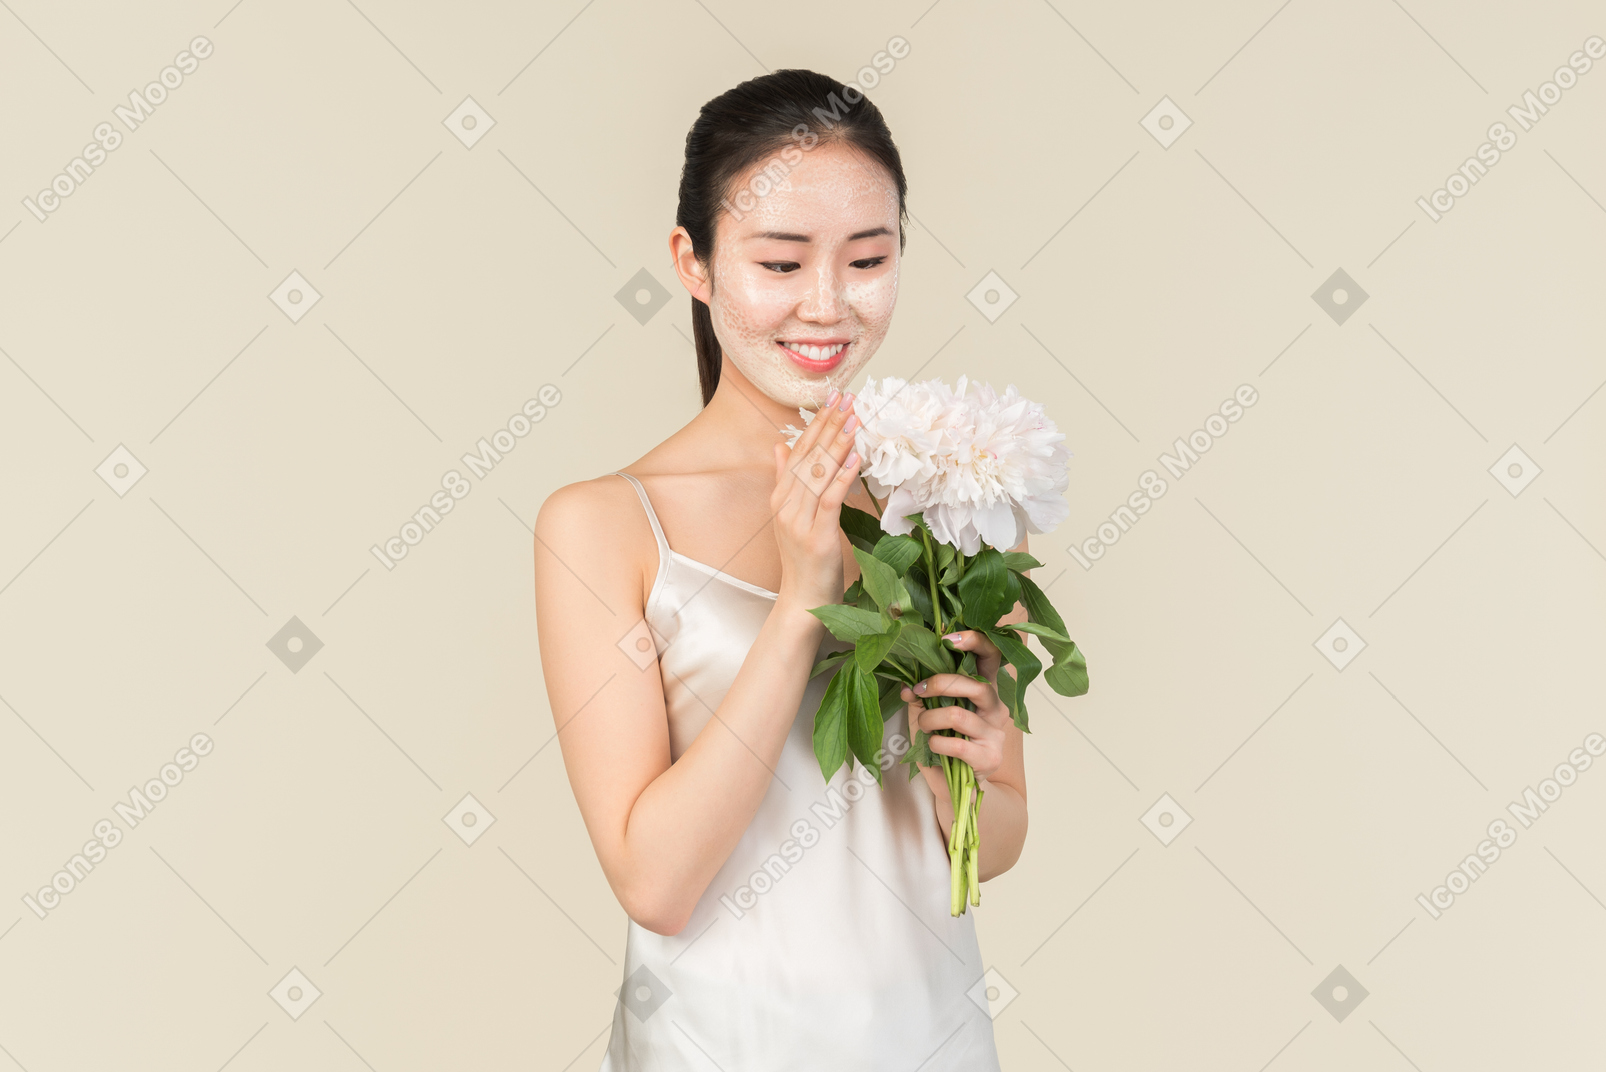 Dreamy young asian woman with facial mask on holding flowers